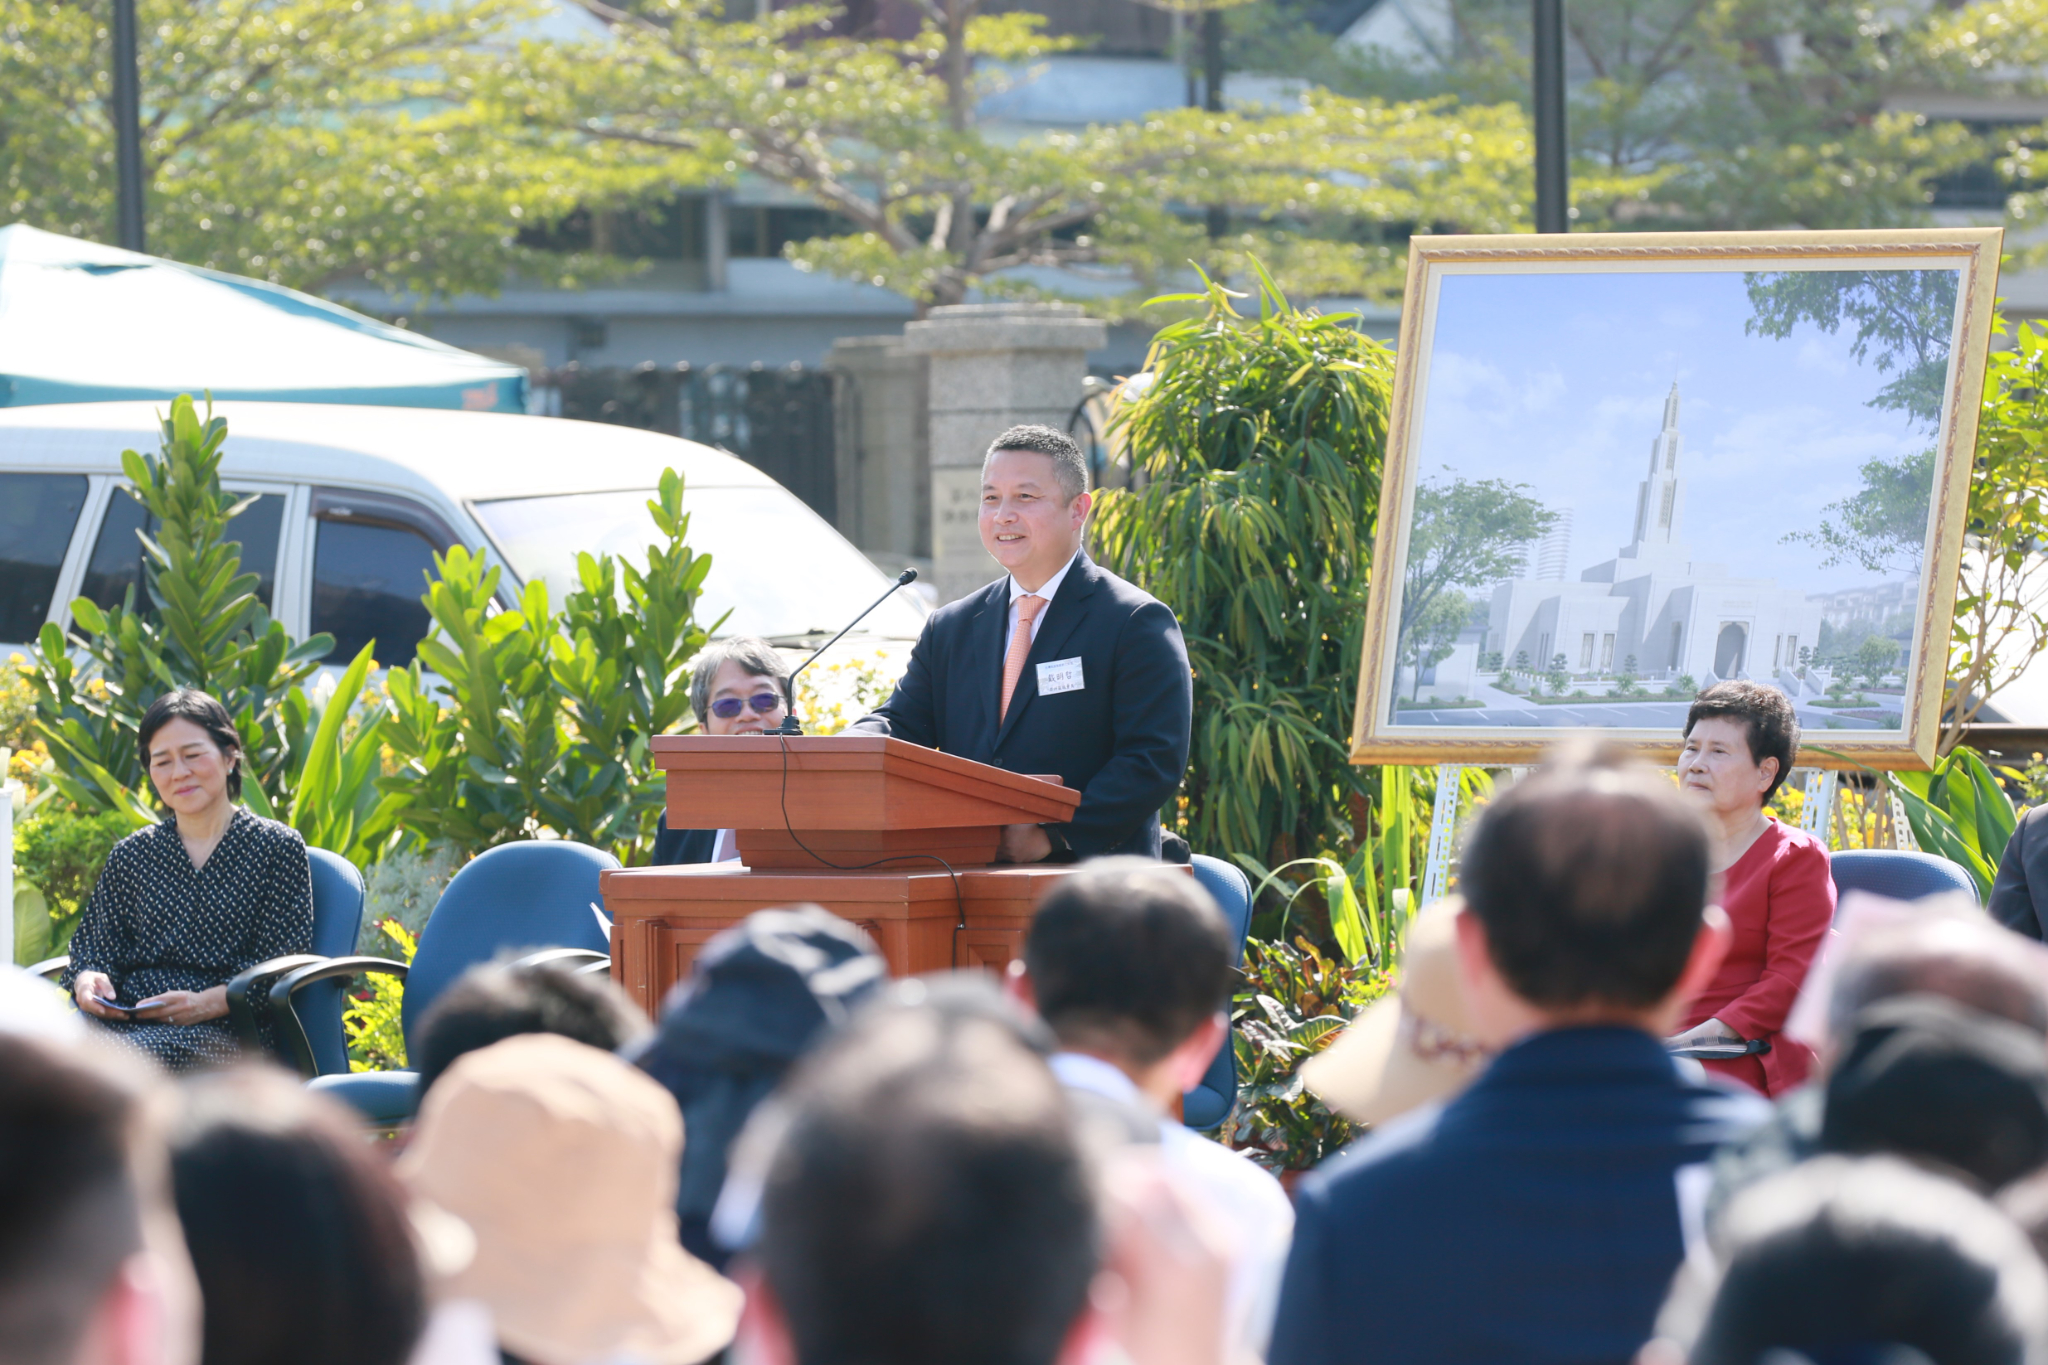 Elder Benjamin M. Z. Tai wearing a suit and tie and speaking from a pulpit outside.